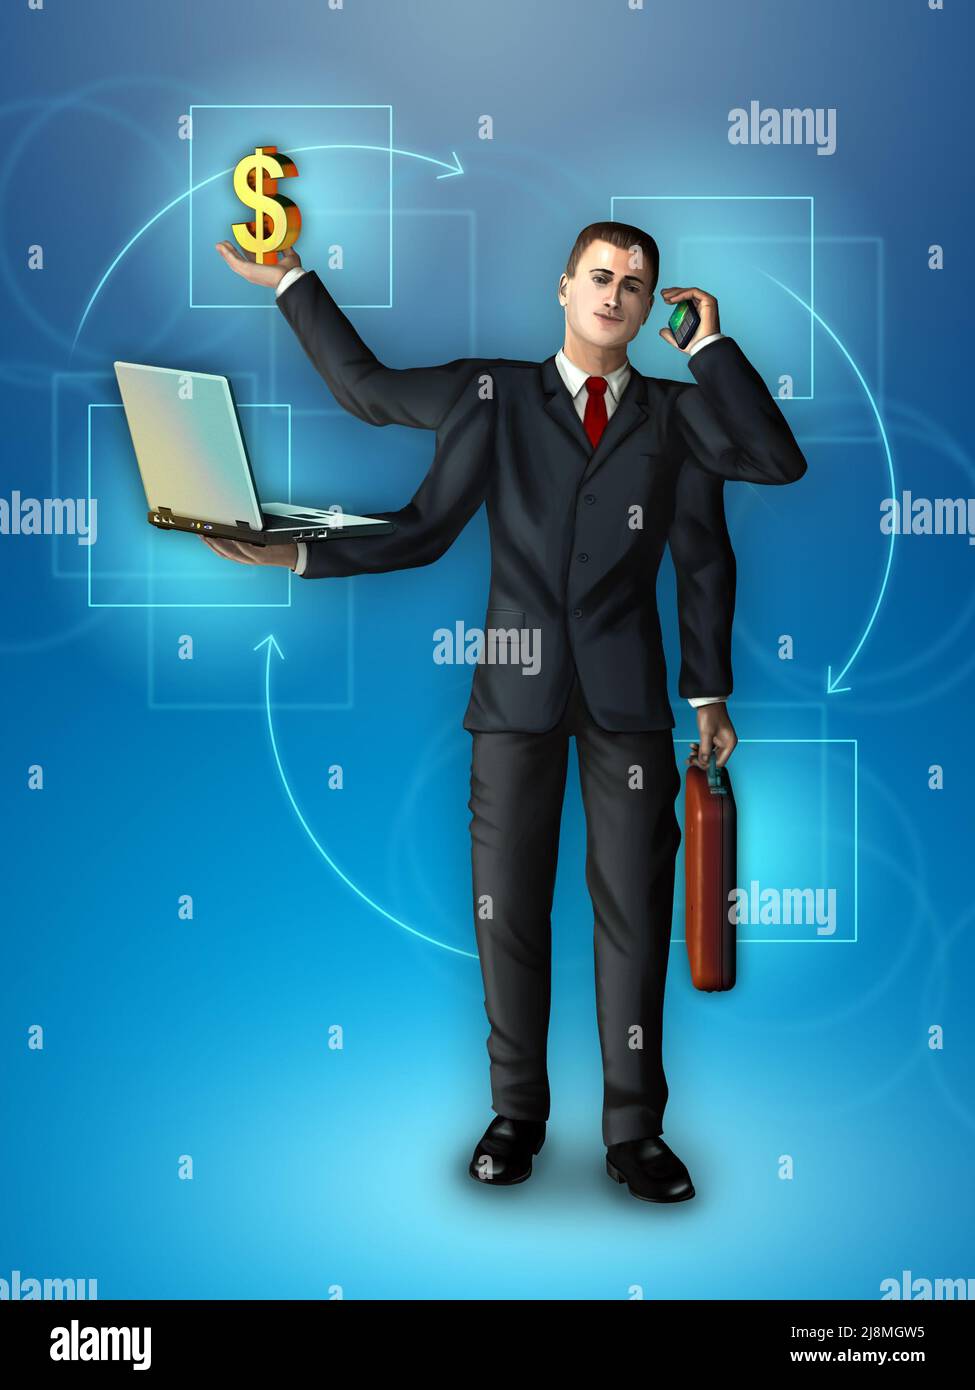 Businessman with multiple arms holding a briefcase, smartphone, notebook and dollar symbol. Digital illustration. Stock Photo